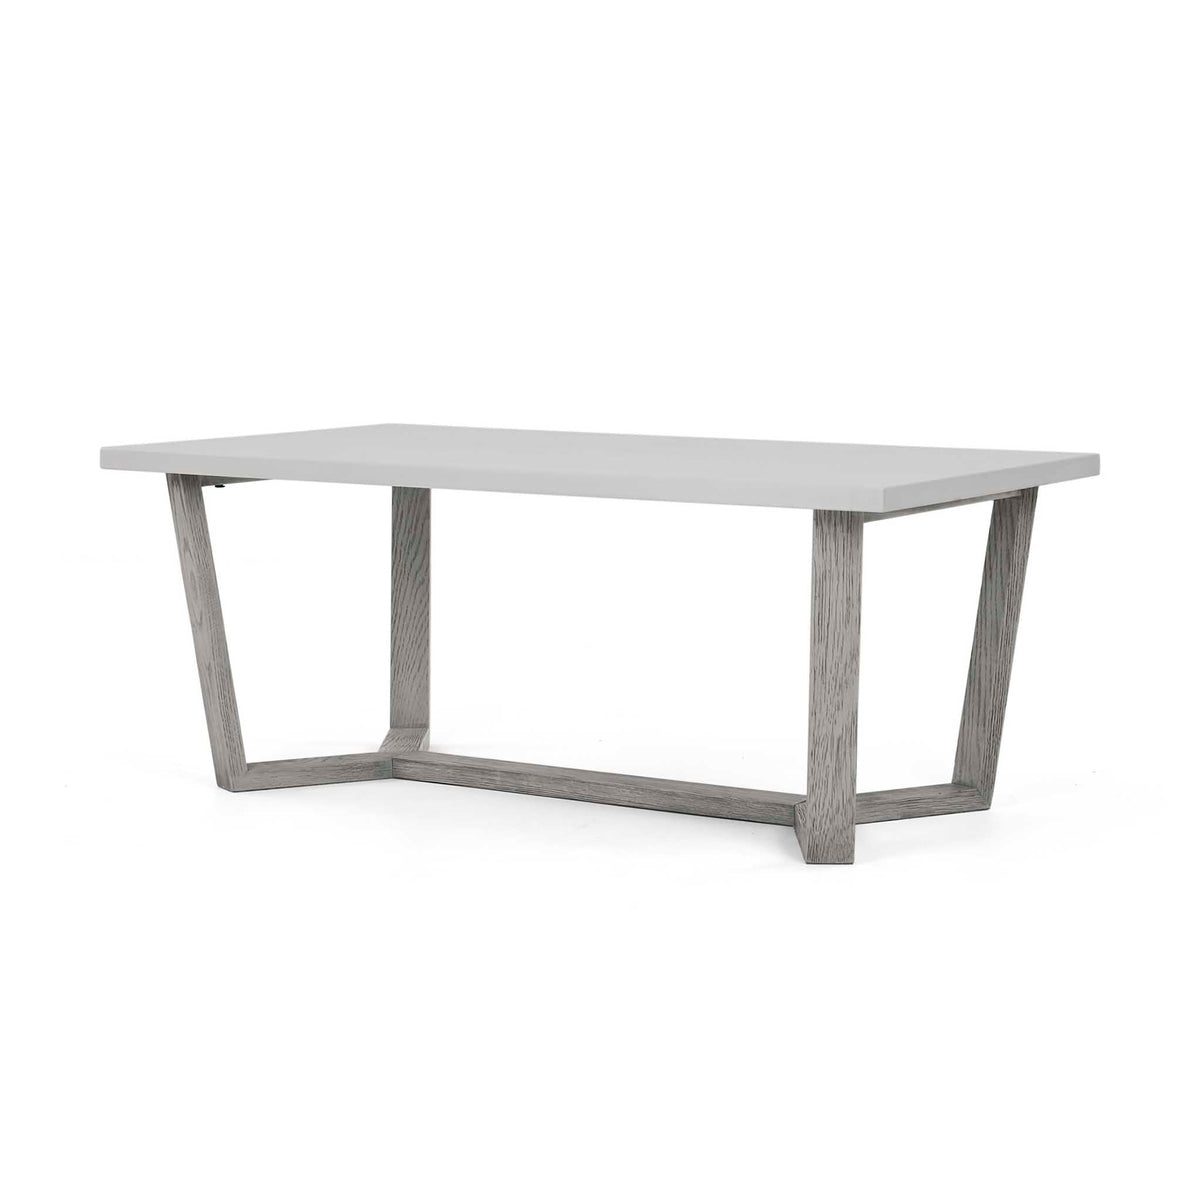 Epsom Rectangular Coffee Table with grey washed wooden frame